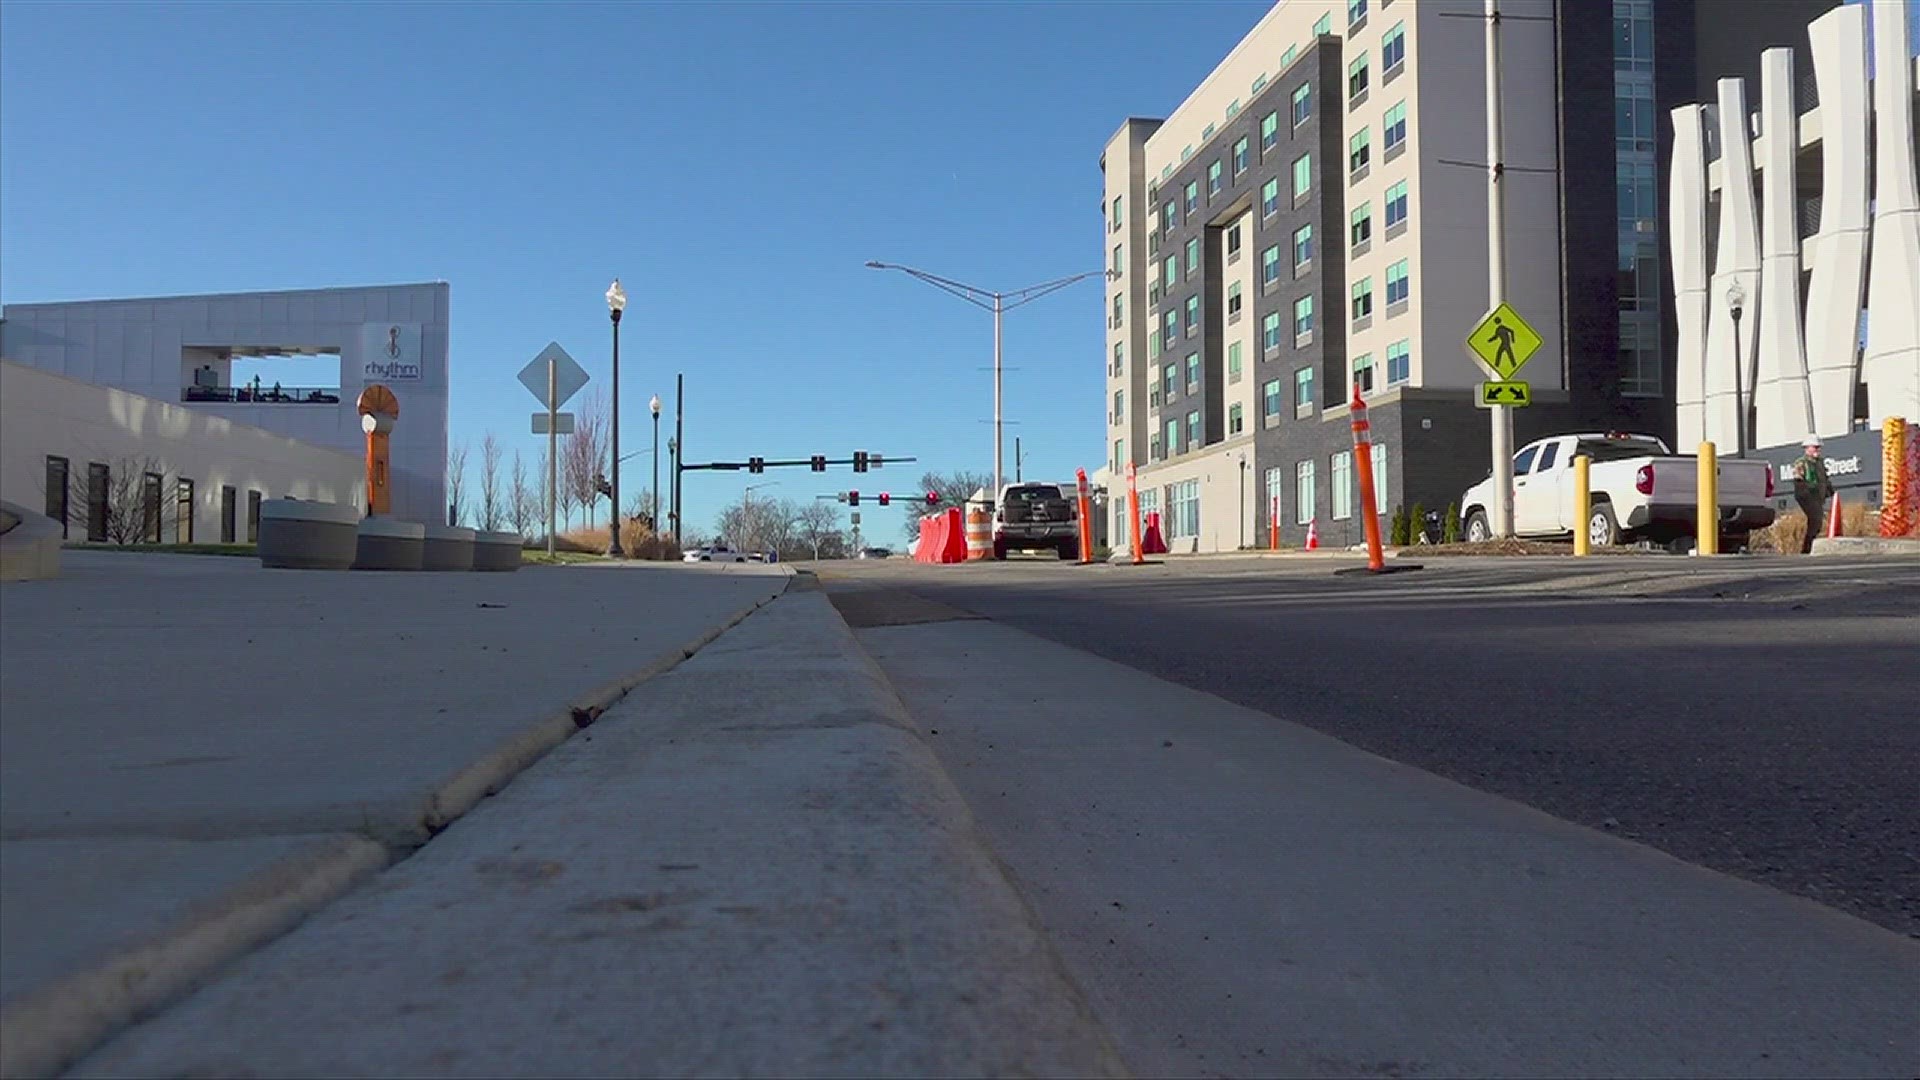 Developers say Front Row and similar projects were forward-thinking in how to improve downtown traffic problems.